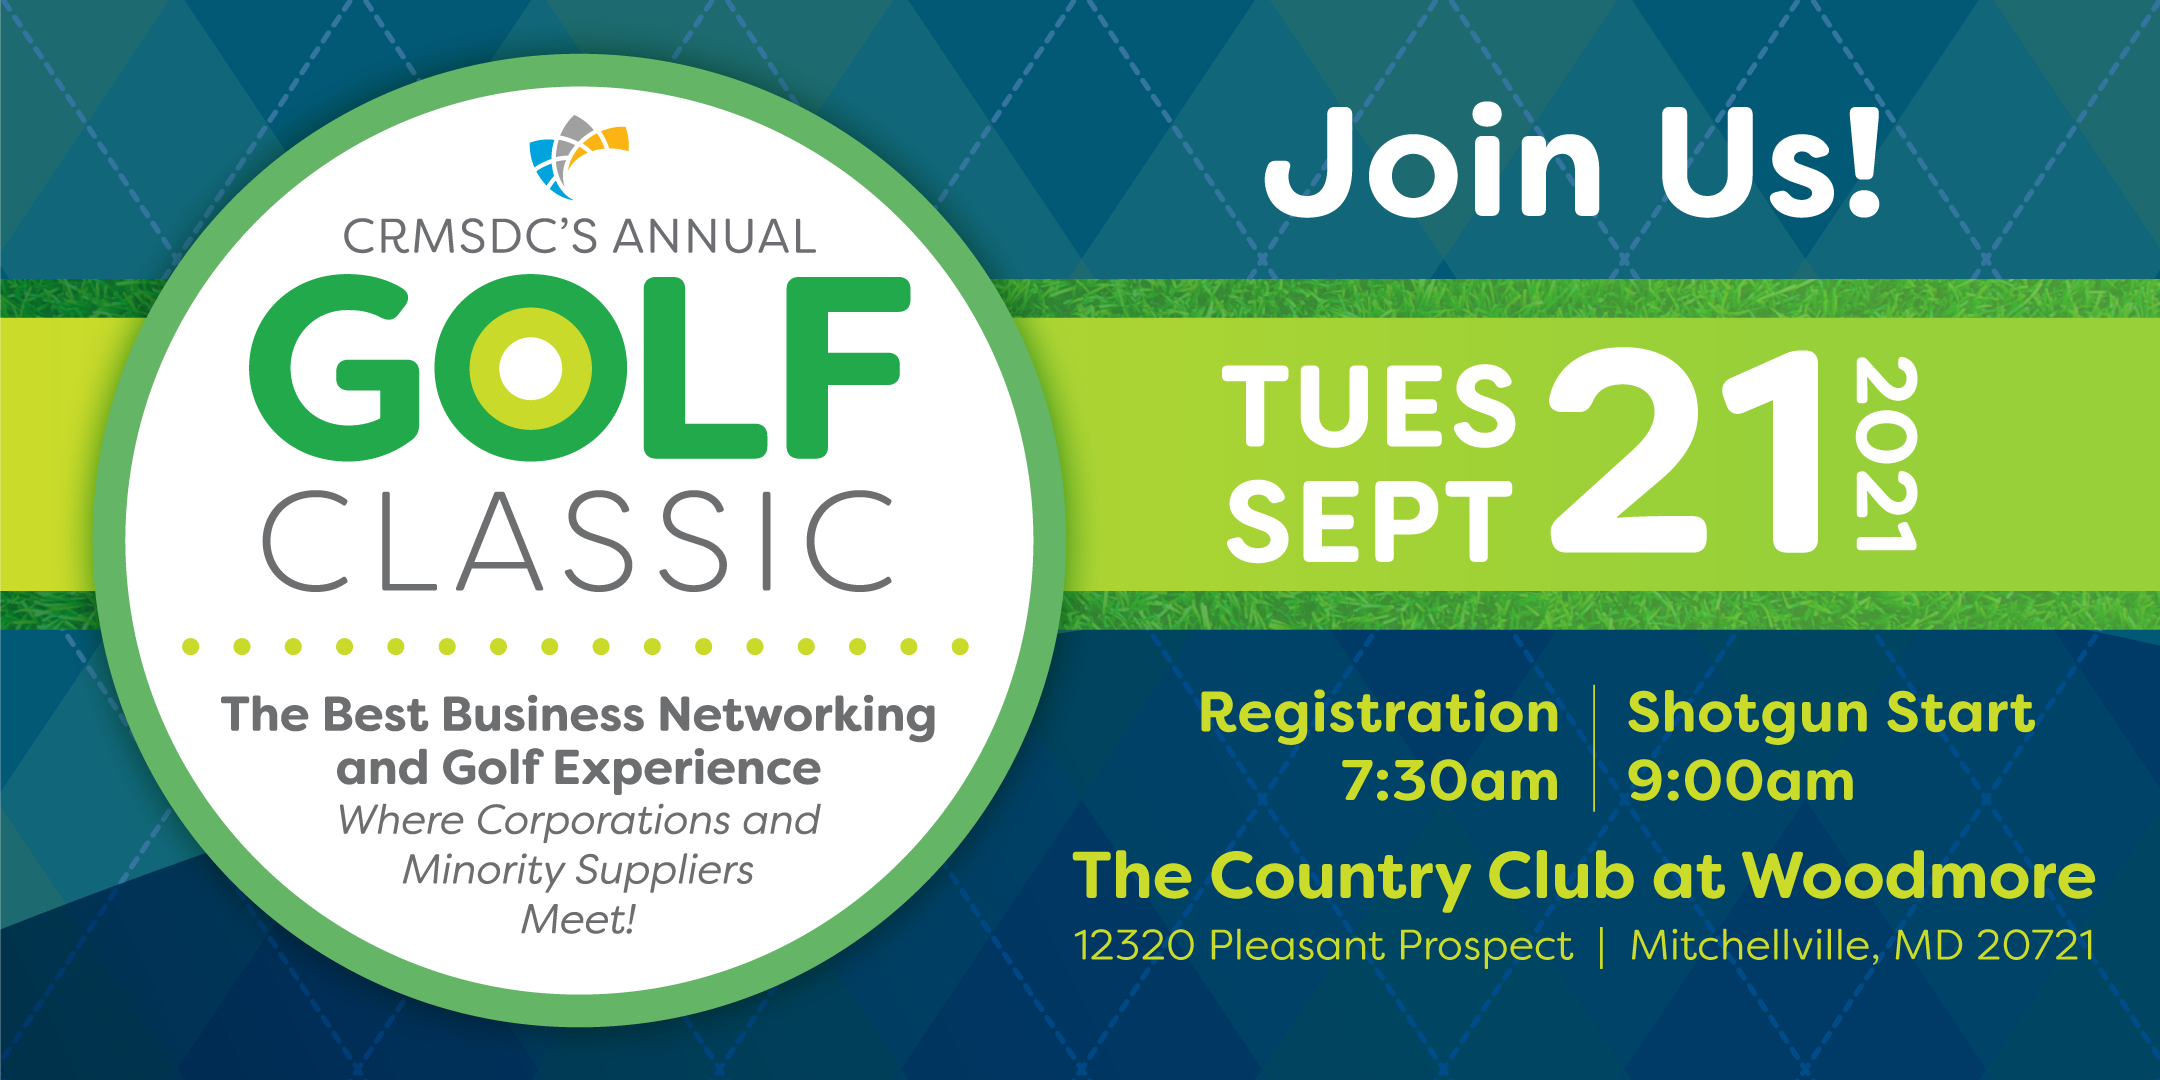 2021 Annual Golf Classic - A Day of Business Golf